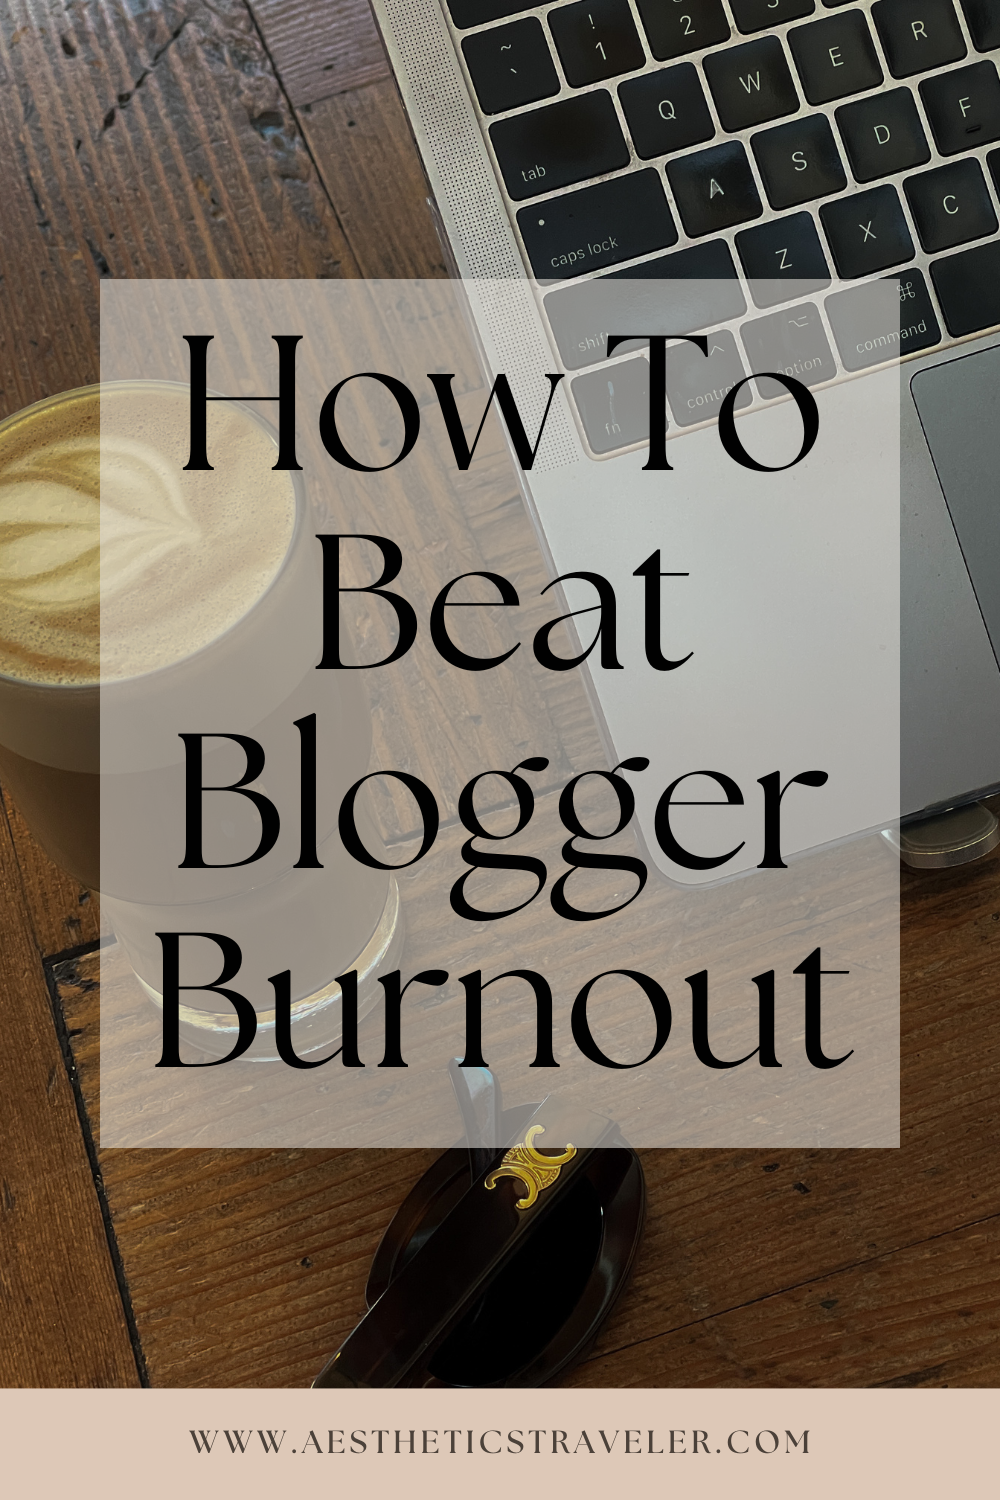 How To Beat Blogger Burnout And Find Fresh Content Ideas | www.aestheticstraveler.com Your go-to resource for travel blogging tips and tricks from a 10-year travel blogger and influencer marketing professional